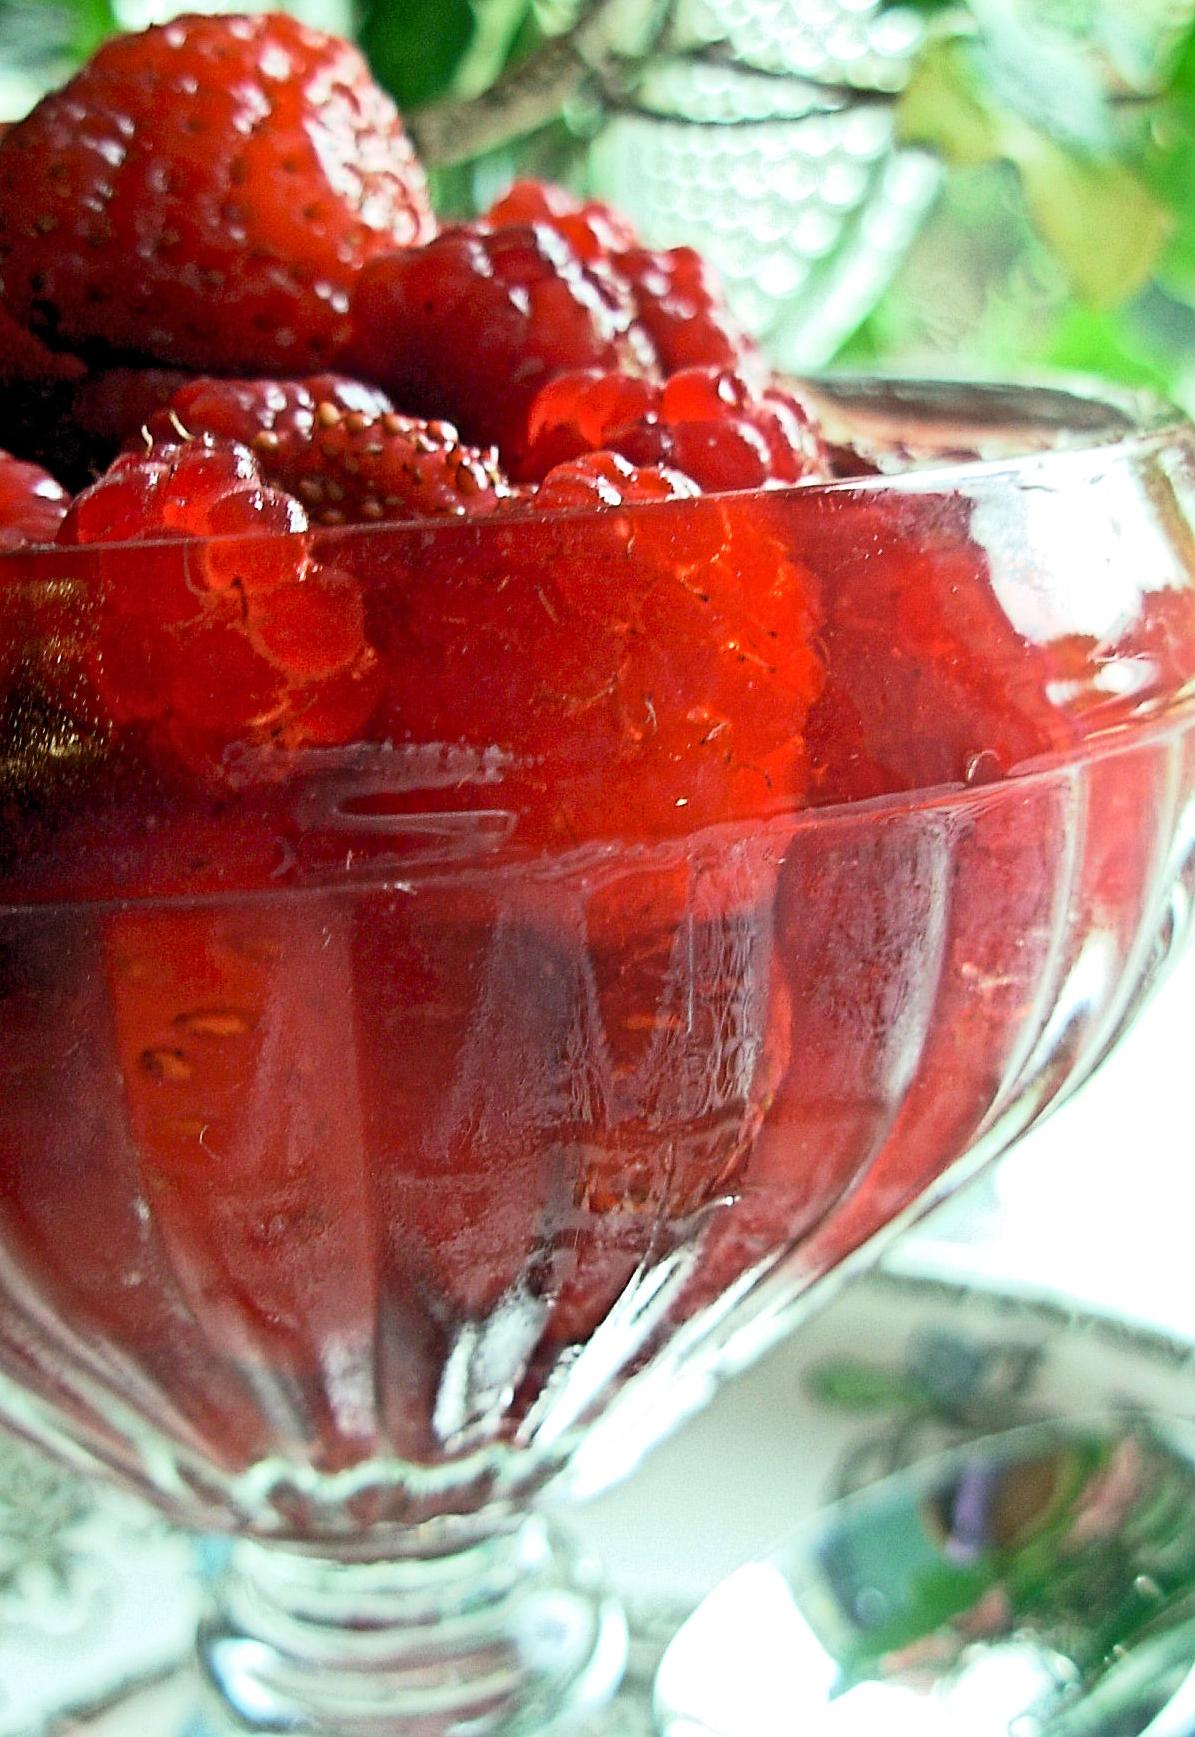  A sweet and refreshing treat to cool you down on a hot summer day.